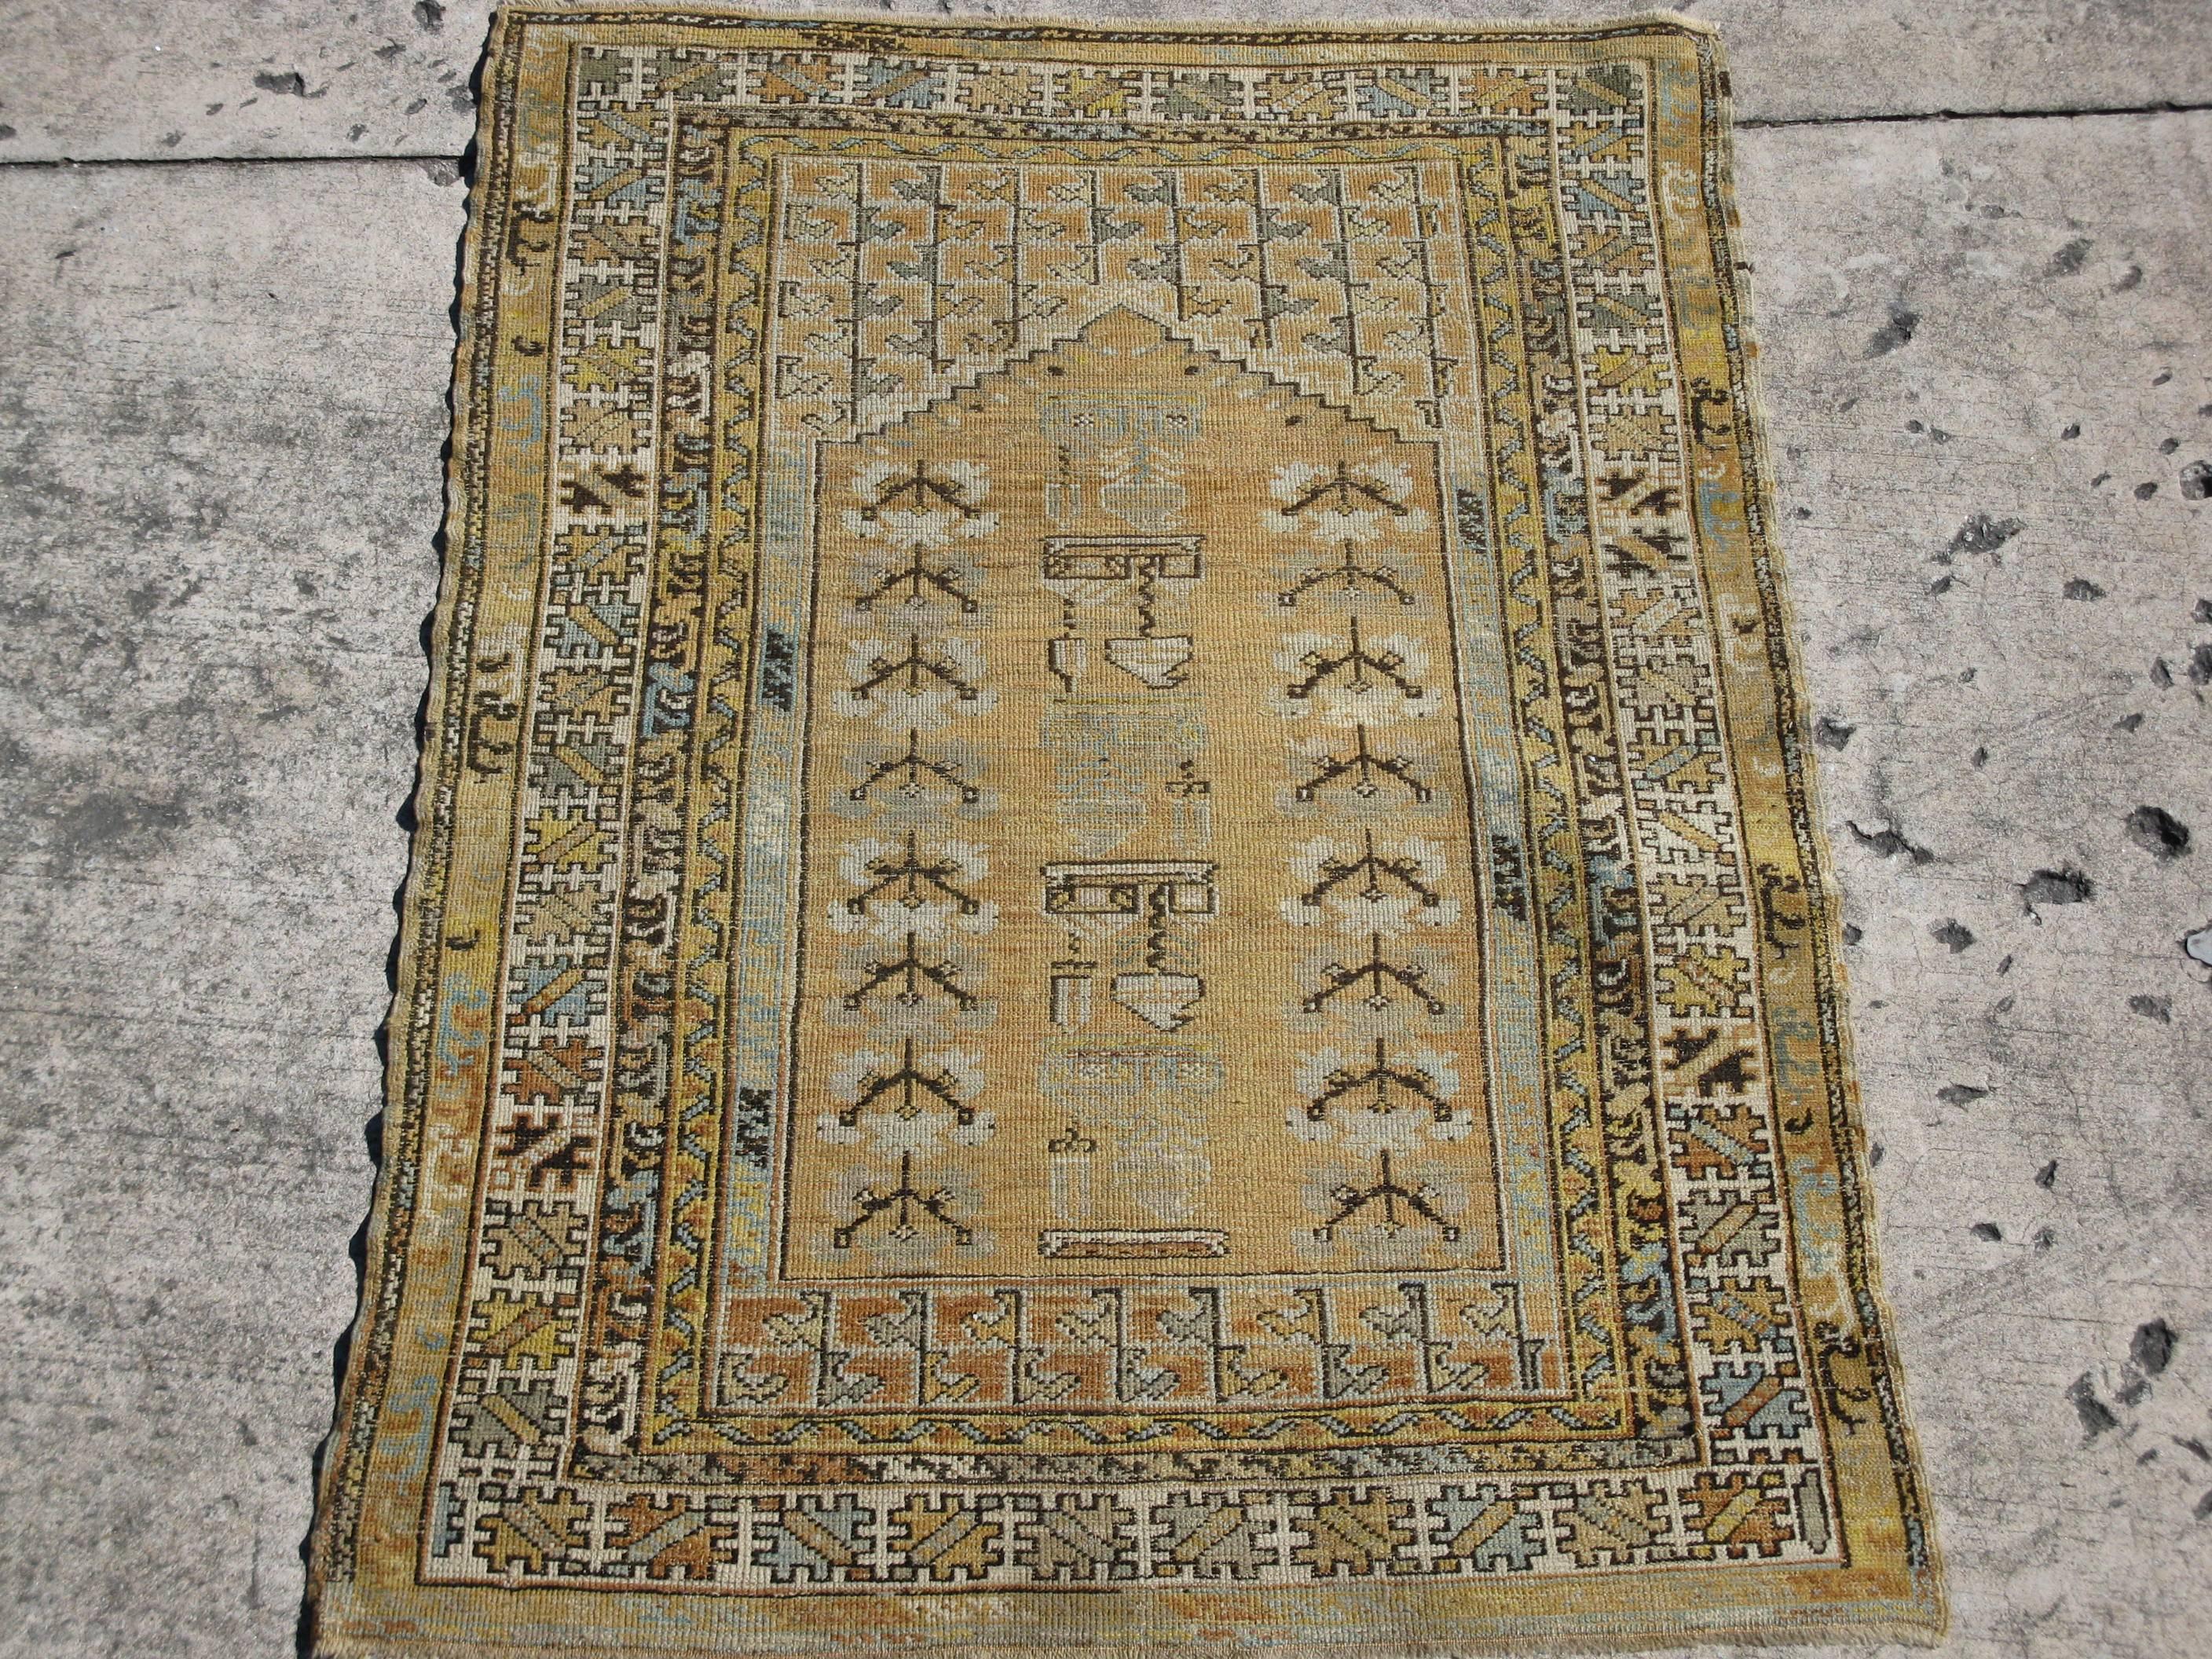 This is a unique and beautiful small hand-knotted rug from the Anatolian region of Turkey. The rug has beautiful soft color combination with all natural earth tone colors. It is in great condition and measures 3' 10'' x 5' 6''.